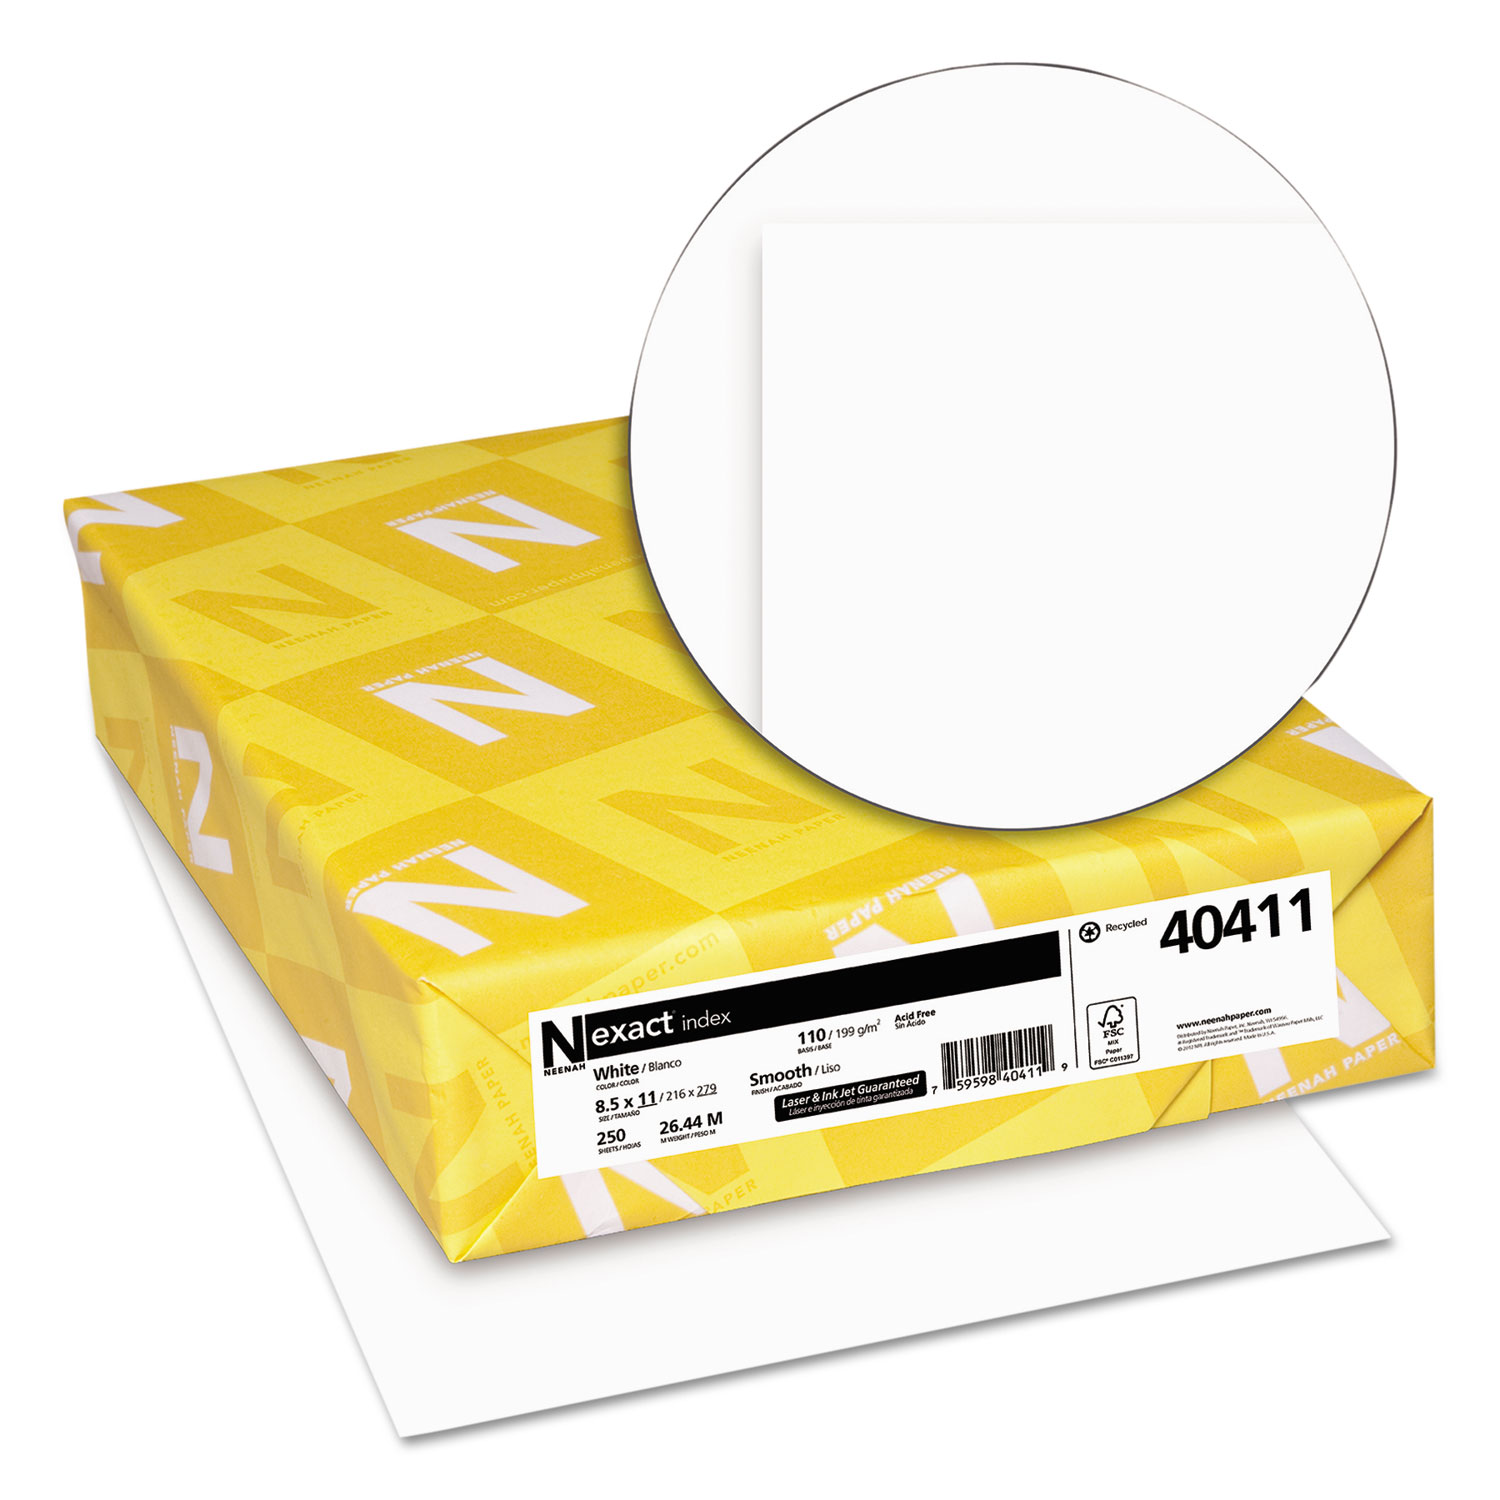 Exact Index Card Stock, 110lb, 94 Bright, 8 1/2 x 11, White, 250 Sheets